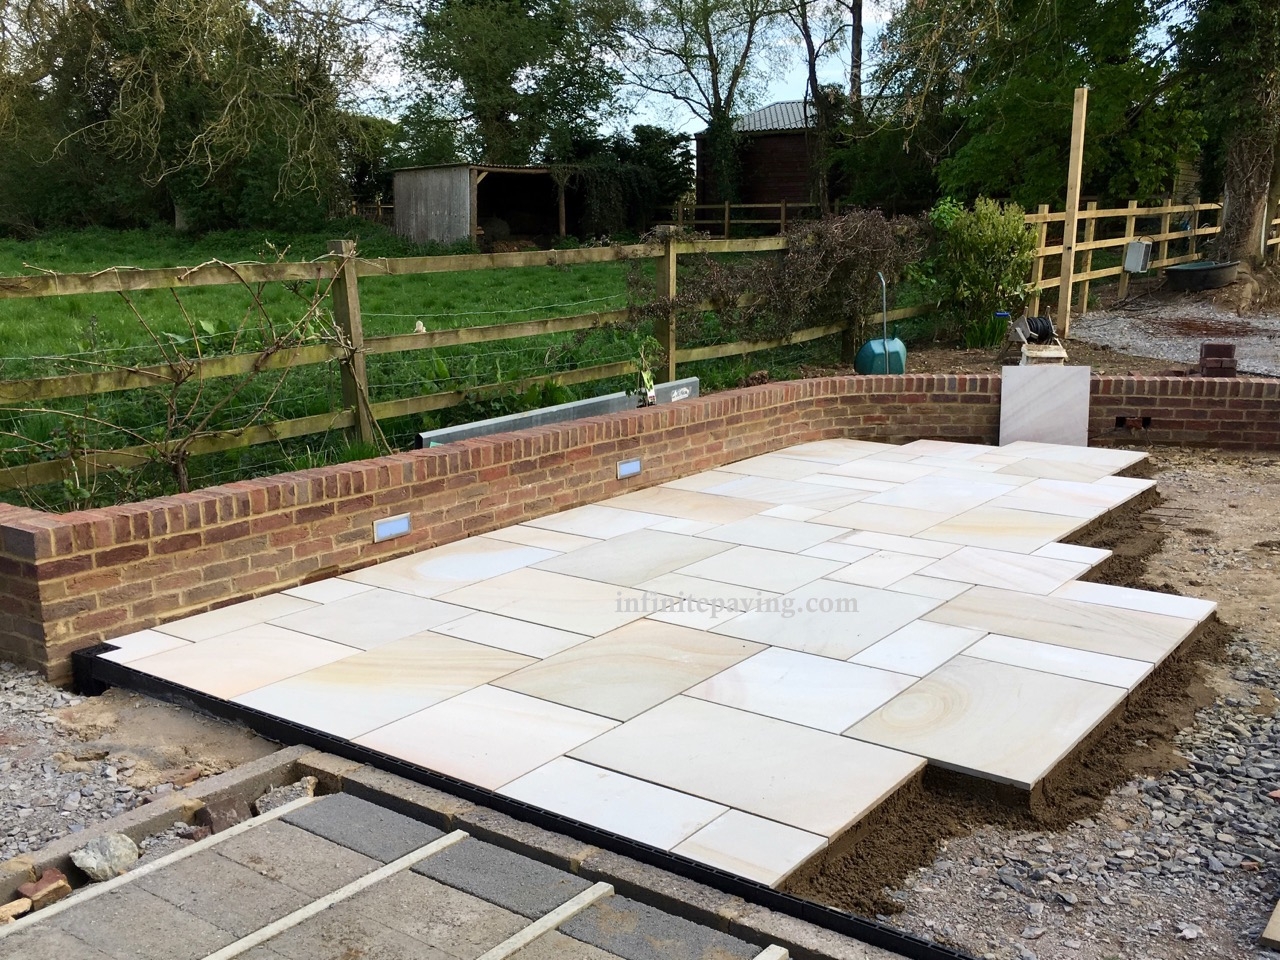 Sawn Camel Dust Honed 1200x600mm Paving Stone Pack 22mm 17.5m² – Indian Sandstone – £29 Per M² – Infinite Paving